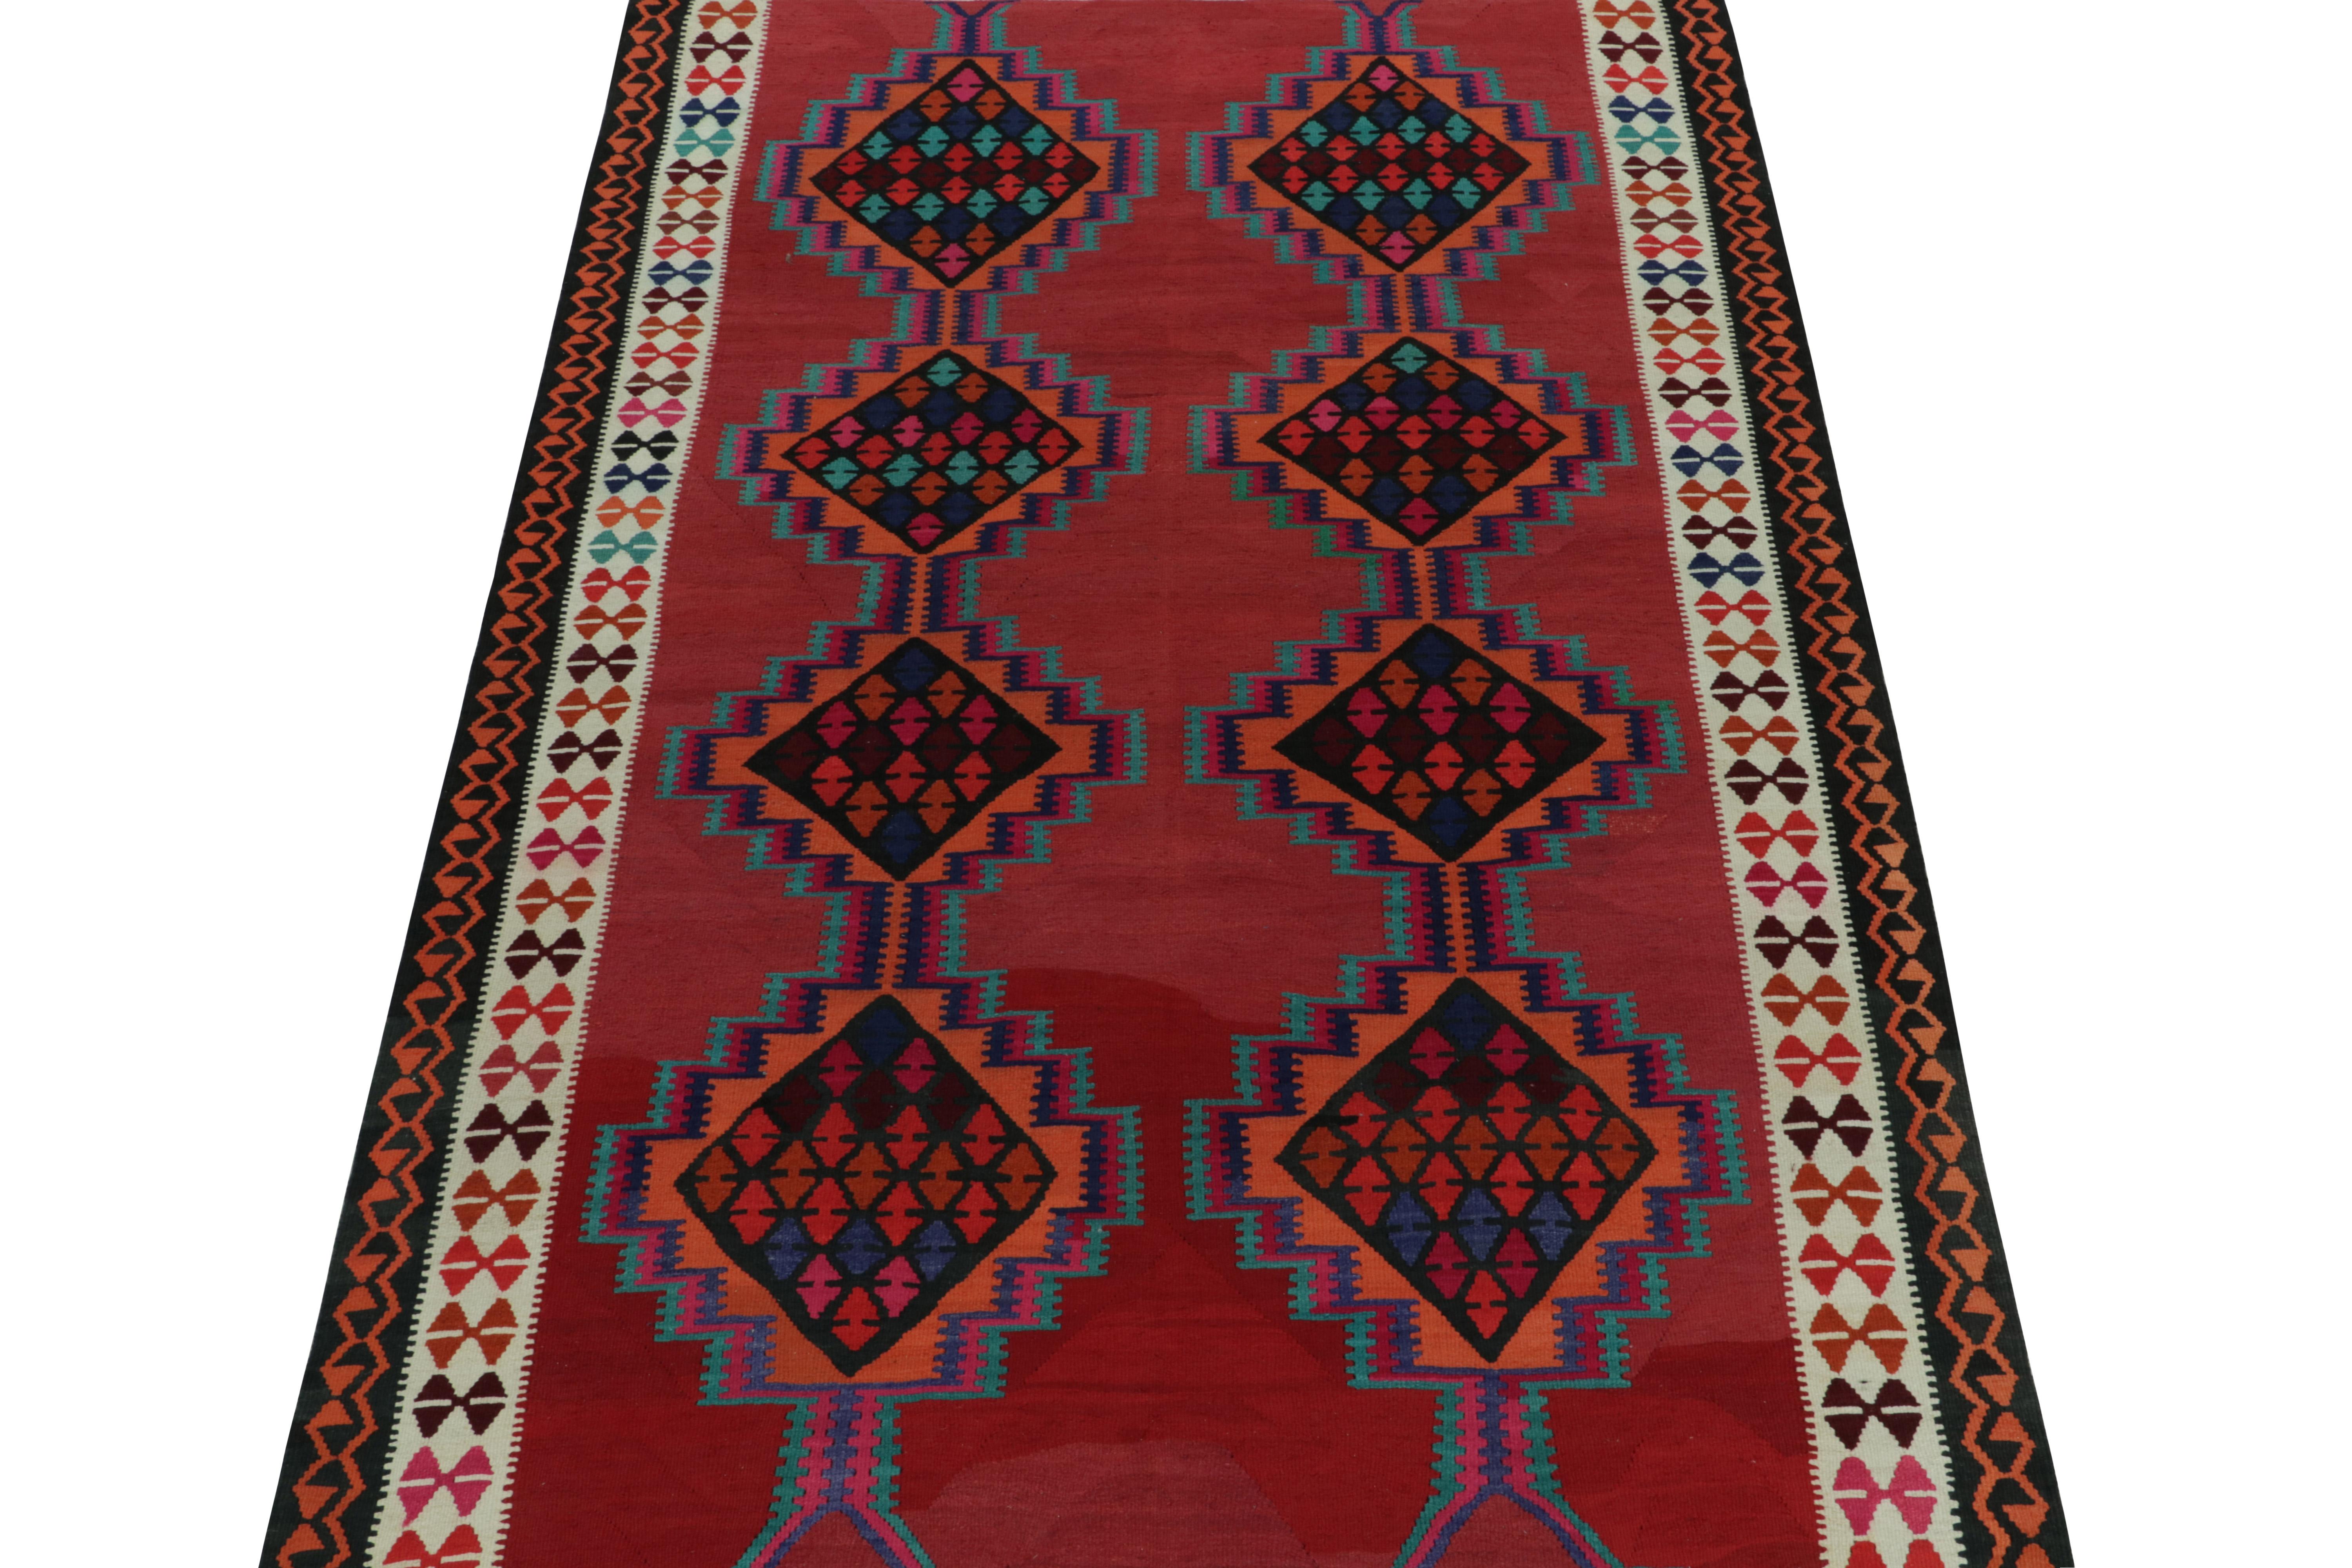 Tribal 1950s Vintage Kilim Rug in Red with Colorful Geometric Patterns by Rug & Kilim For Sale